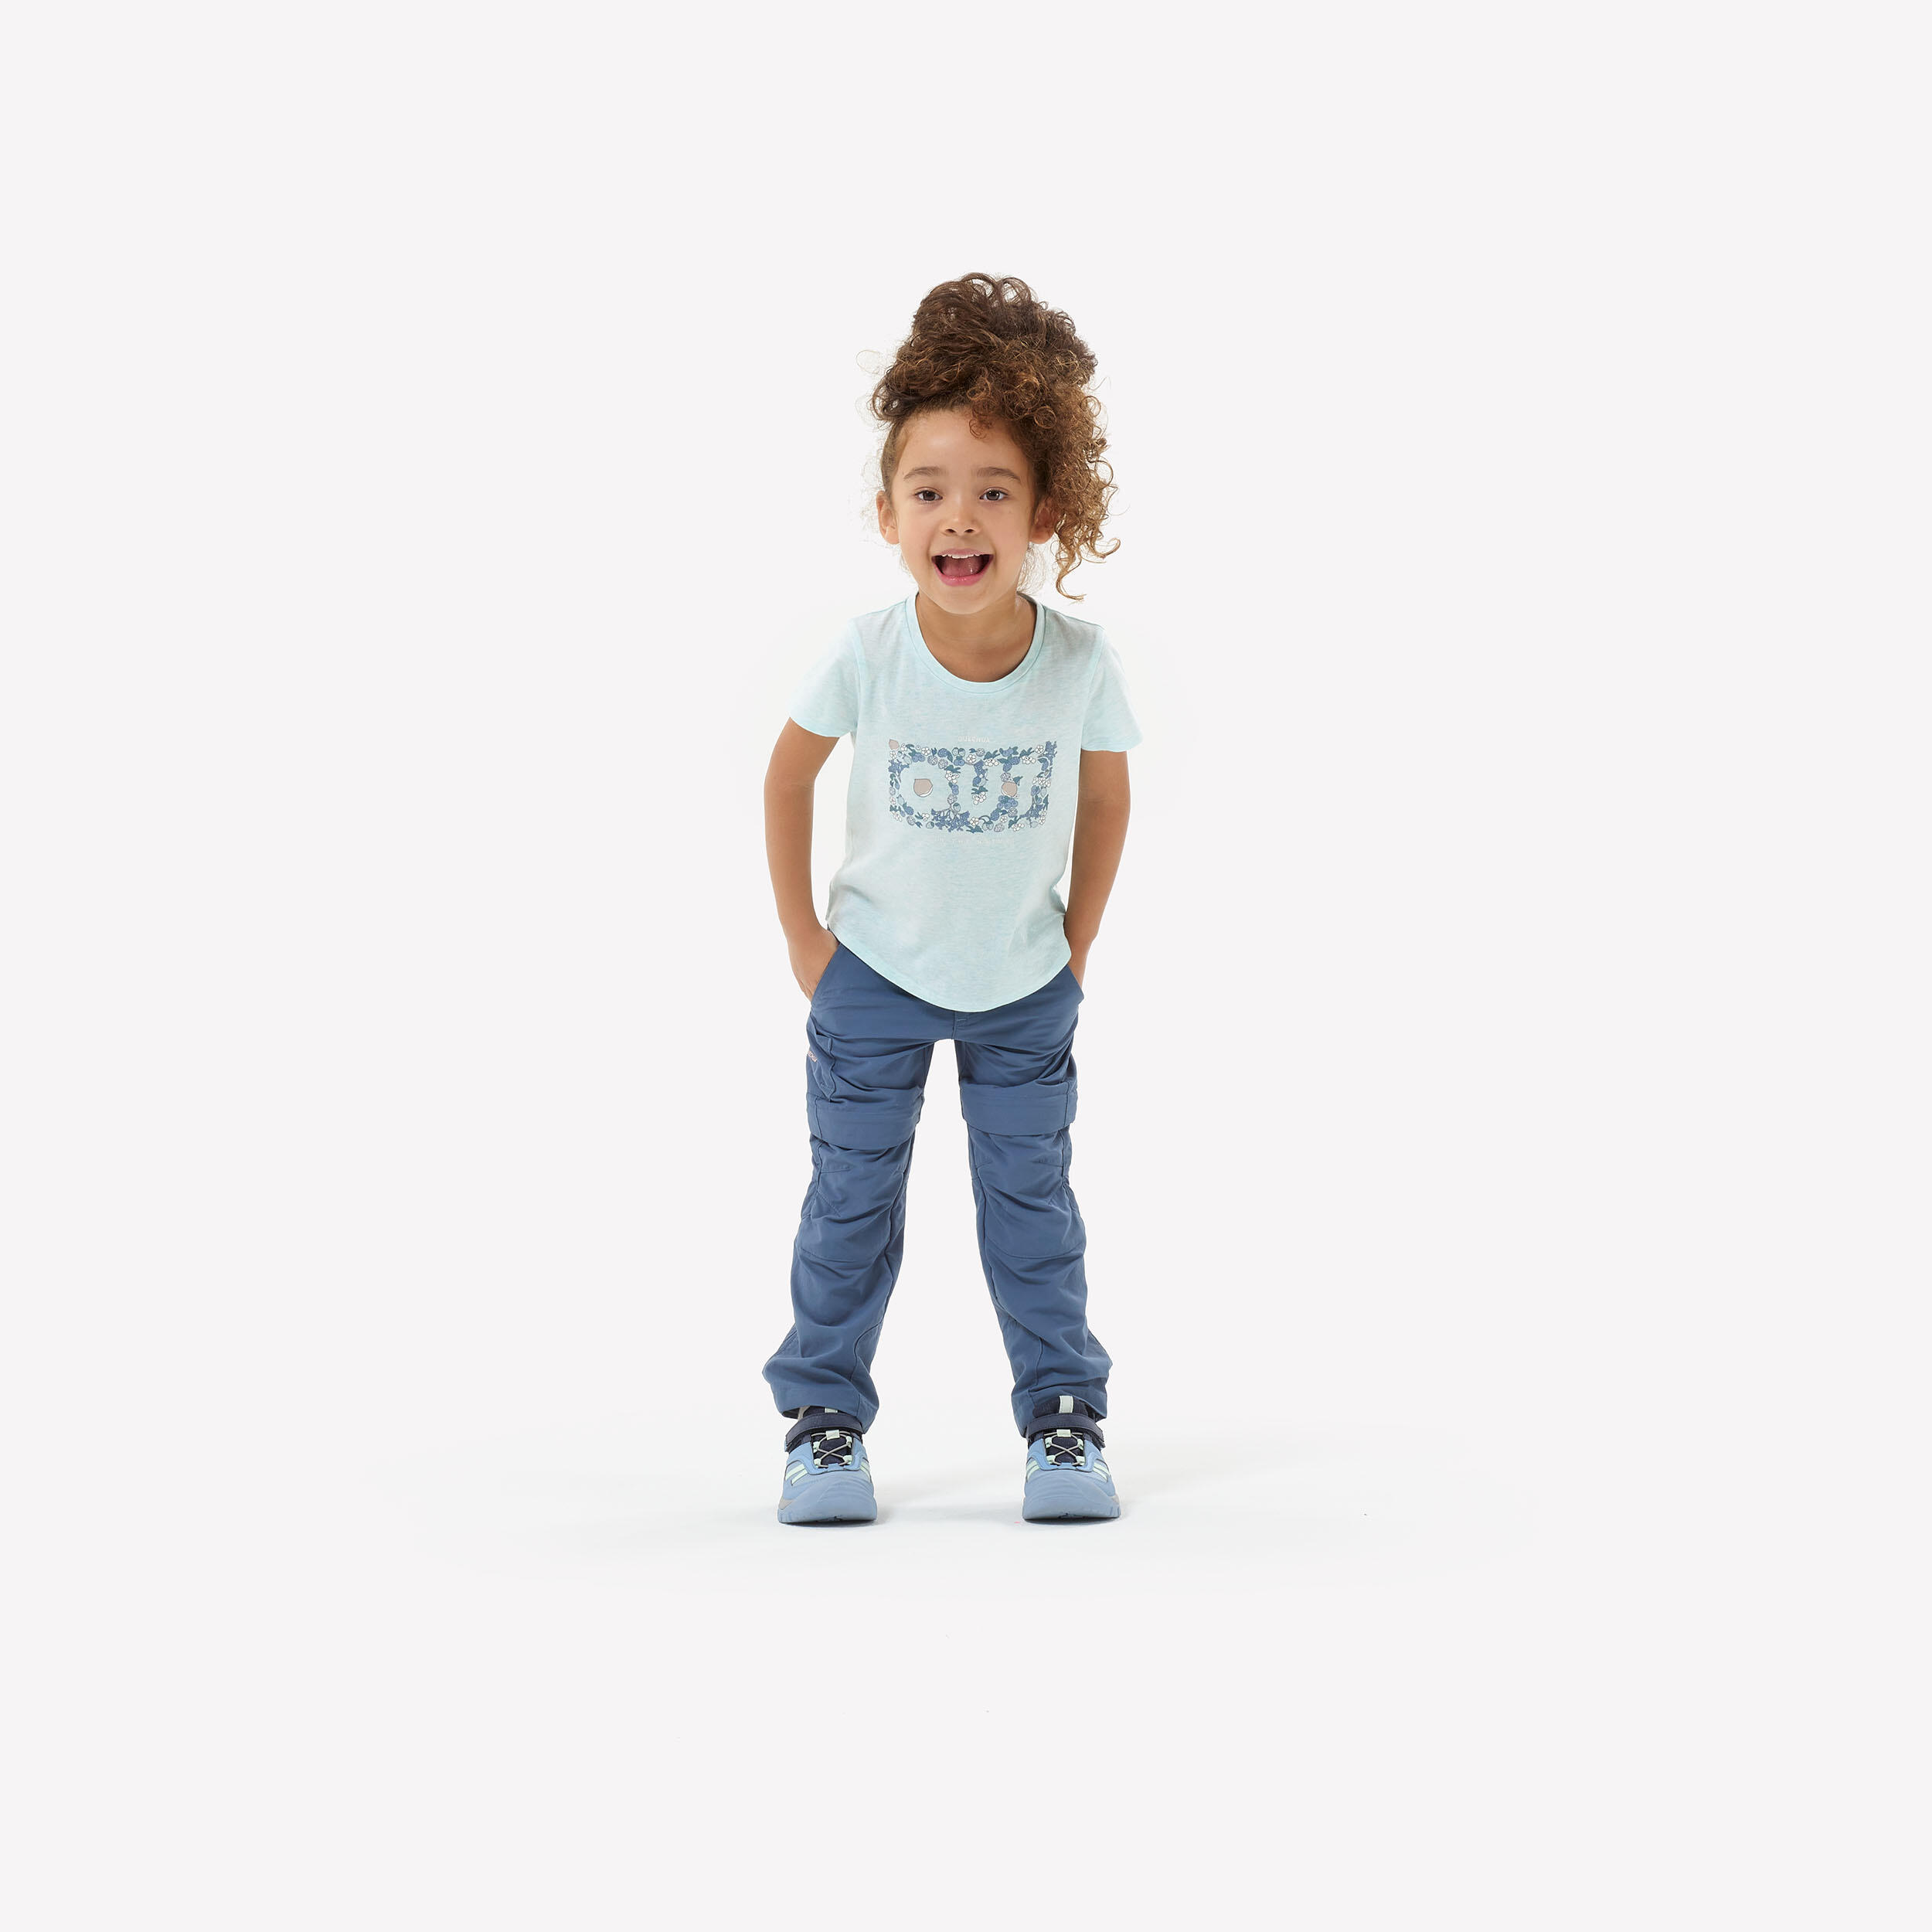 Kids’ T-Shirt - MH100 Ages 2-6 - Green 2/6